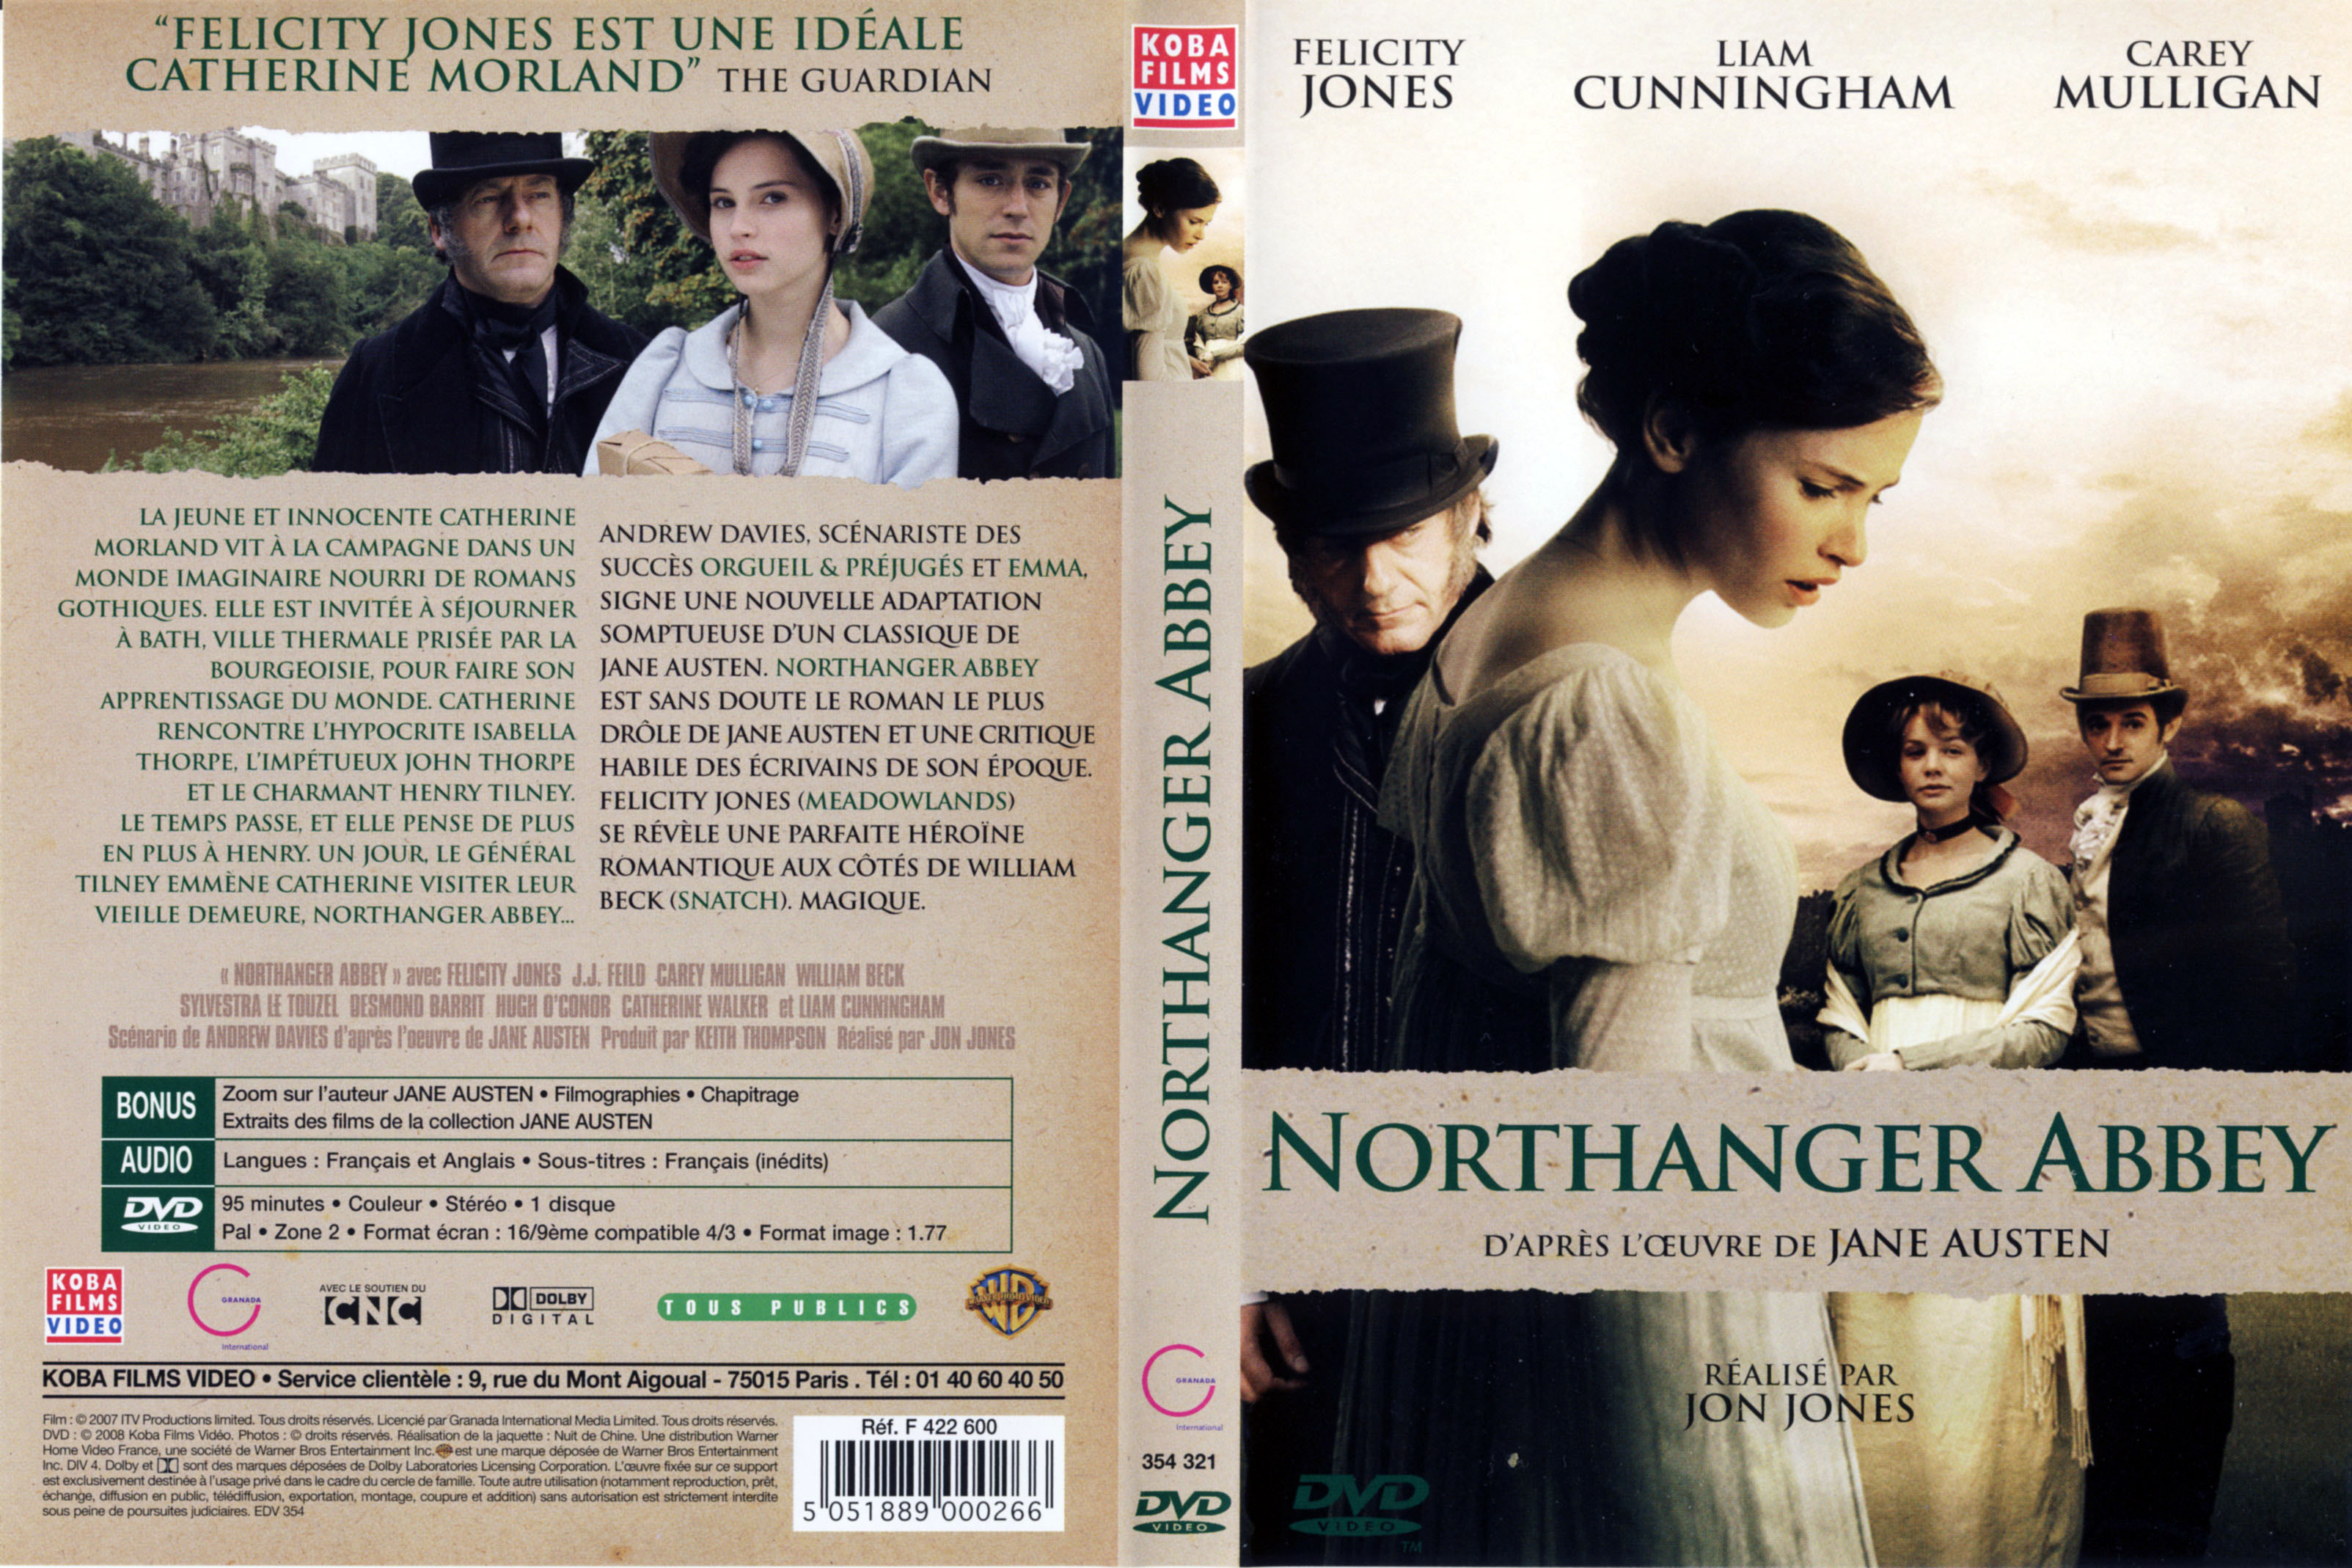 Jaquette DVD Northanger abbey